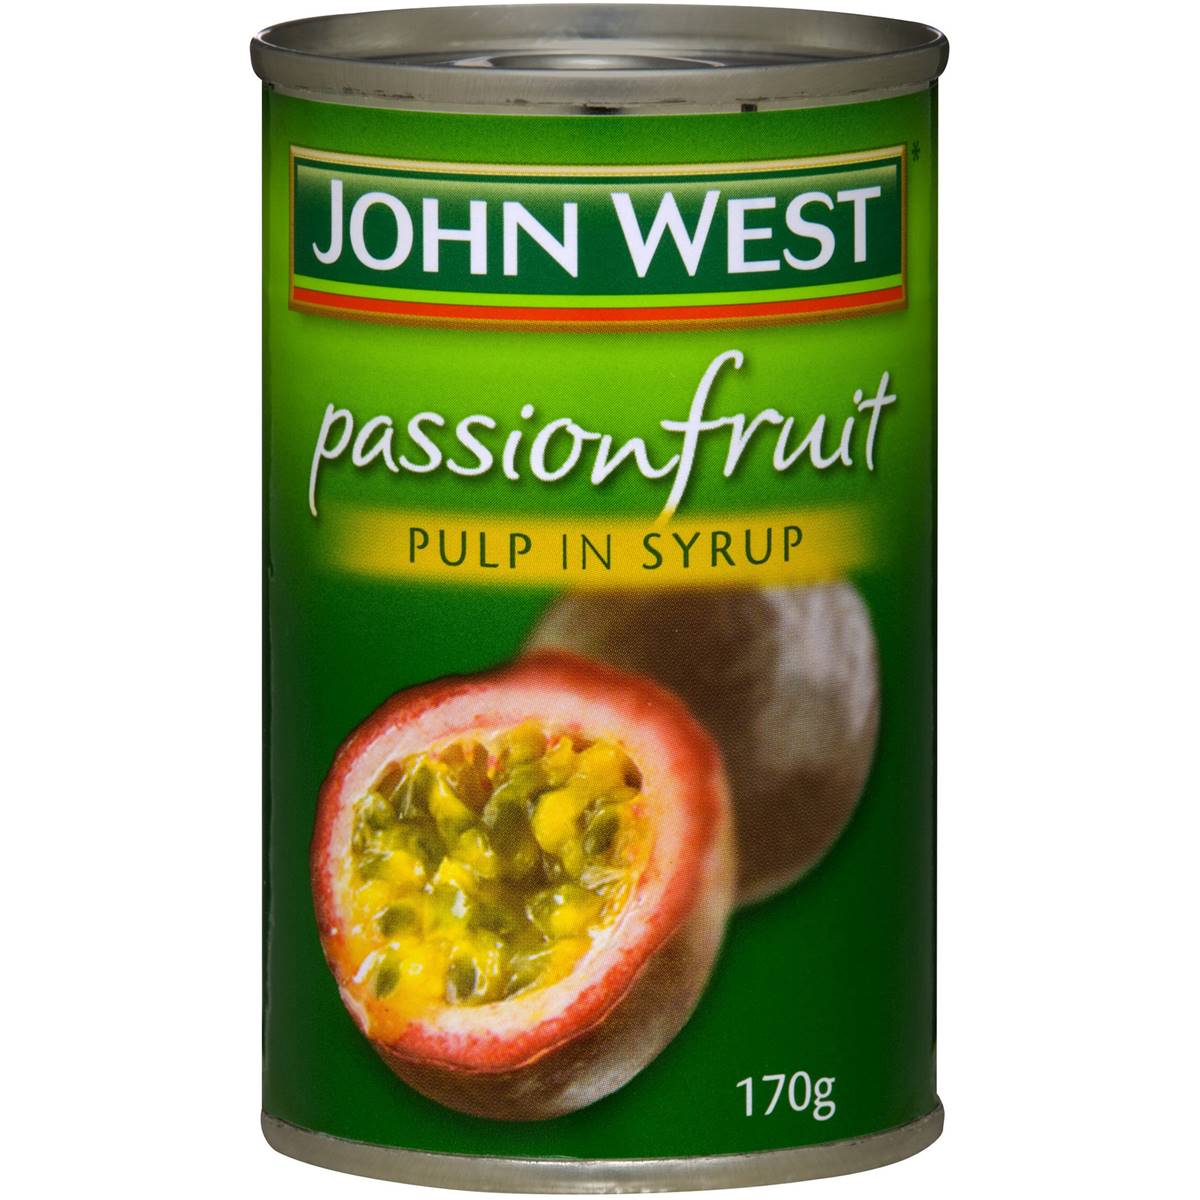 Calories in John West Passionfruit Pulp In Syrup